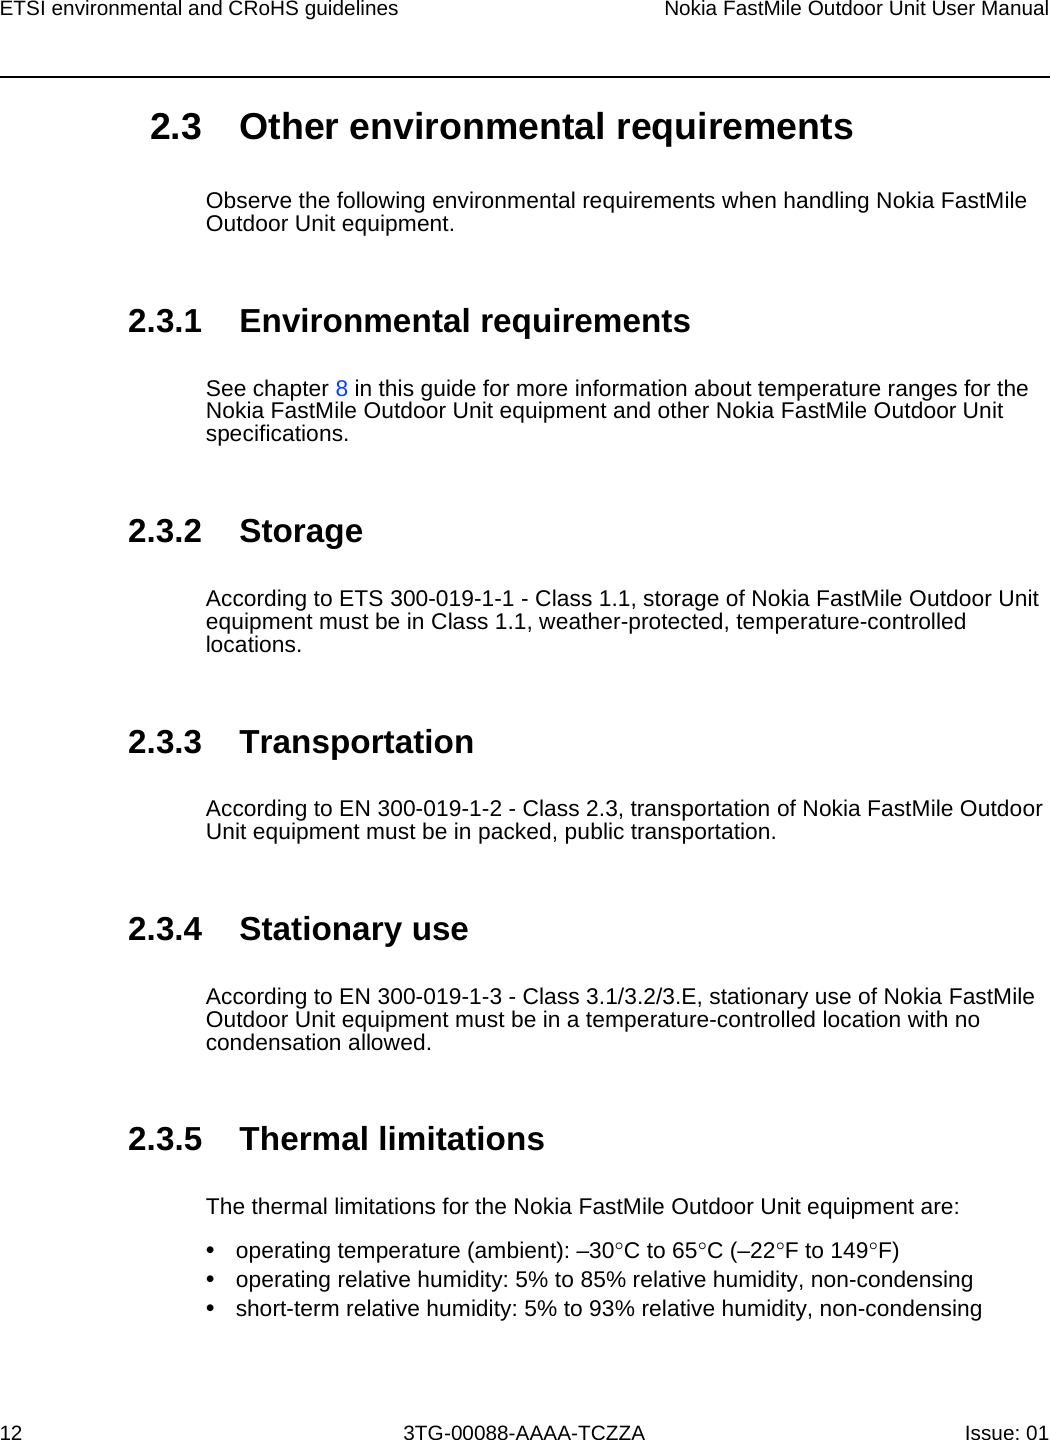 ETSI environmental and CRoHS guidelines12Nokia FastMile Outdoor Unit User Manual3TG-00088-AAAA-TCZZA Issue: 01 2.3 Other environmental requirementsObserve the following environmental requirements when handling Nokia FastMile Outdoor Unit equipment.2.3.1 Environmental requirementsSee chapter 8 in this guide for more information about temperature ranges for the Nokia FastMile Outdoor Unit equipment and other Nokia FastMile Outdoor Unit specifications. 2.3.2 StorageAccording to ETS 300-019-1-1 - Class 1.1, storage of Nokia FastMile Outdoor Unit equipment must be in Class 1.1, weather-protected, temperature-controlled locations. 2.3.3 TransportationAccording to EN 300-019-1-2 - Class 2.3, transportation of Nokia FastMile Outdoor Unit equipment must be in packed, public transportation.2.3.4 Stationary useAccording to EN 300-019-1-3 - Class 3.1/3.2/3.E, stationary use of Nokia FastMile Outdoor Unit equipment must be in a temperature-controlled location with no condensation allowed. 2.3.5 Thermal limitationsThe thermal limitations for the Nokia FastMile Outdoor Unit equipment are: •operating temperature (ambient): –30°C to 65°C (–22°F to 149°F)•operating relative humidity: 5% to 85% relative humidity, non-condensing•short-term relative humidity: 5% to 93% relative humidity, non-condensing